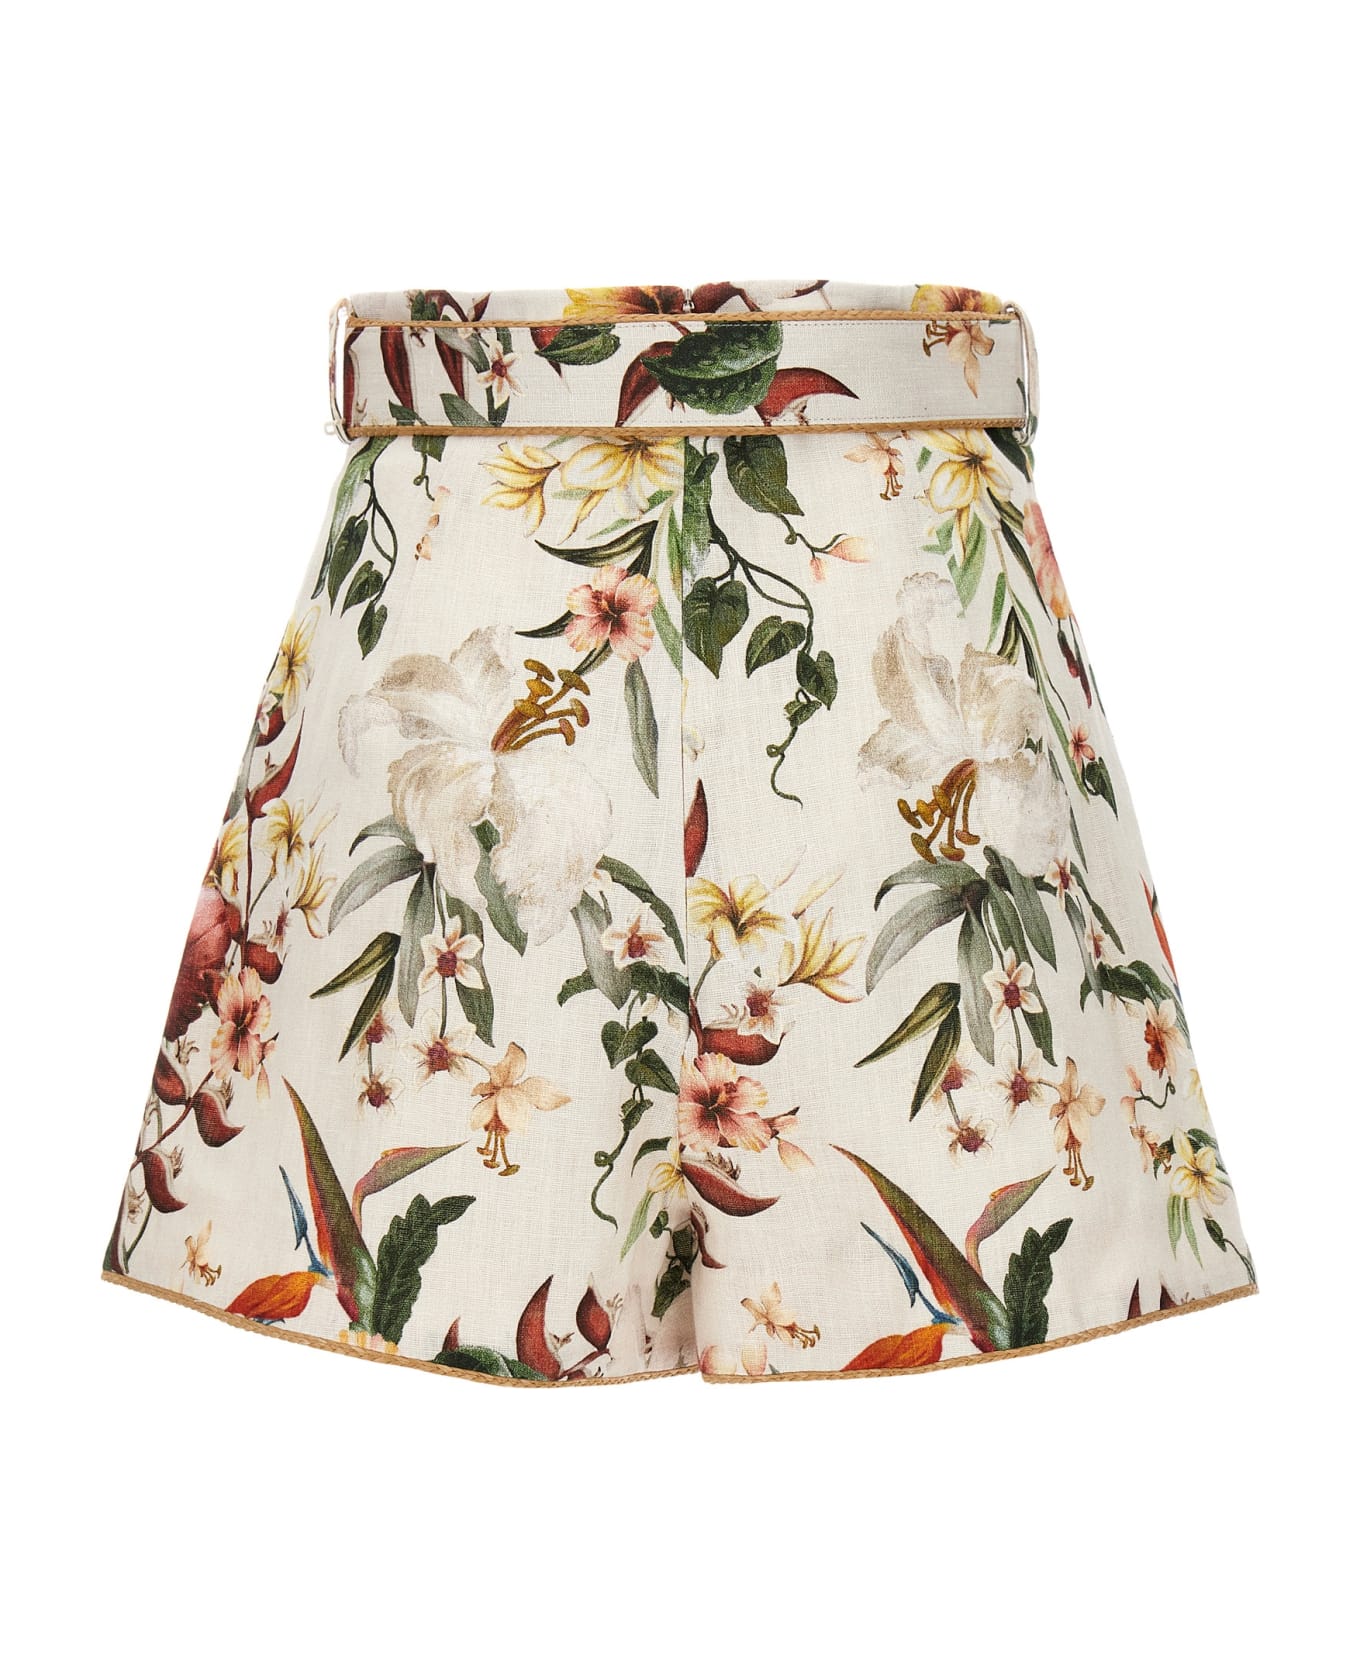 Zimmermann 'lexi Fitted' Shorts - Multicolor ショートパンツ